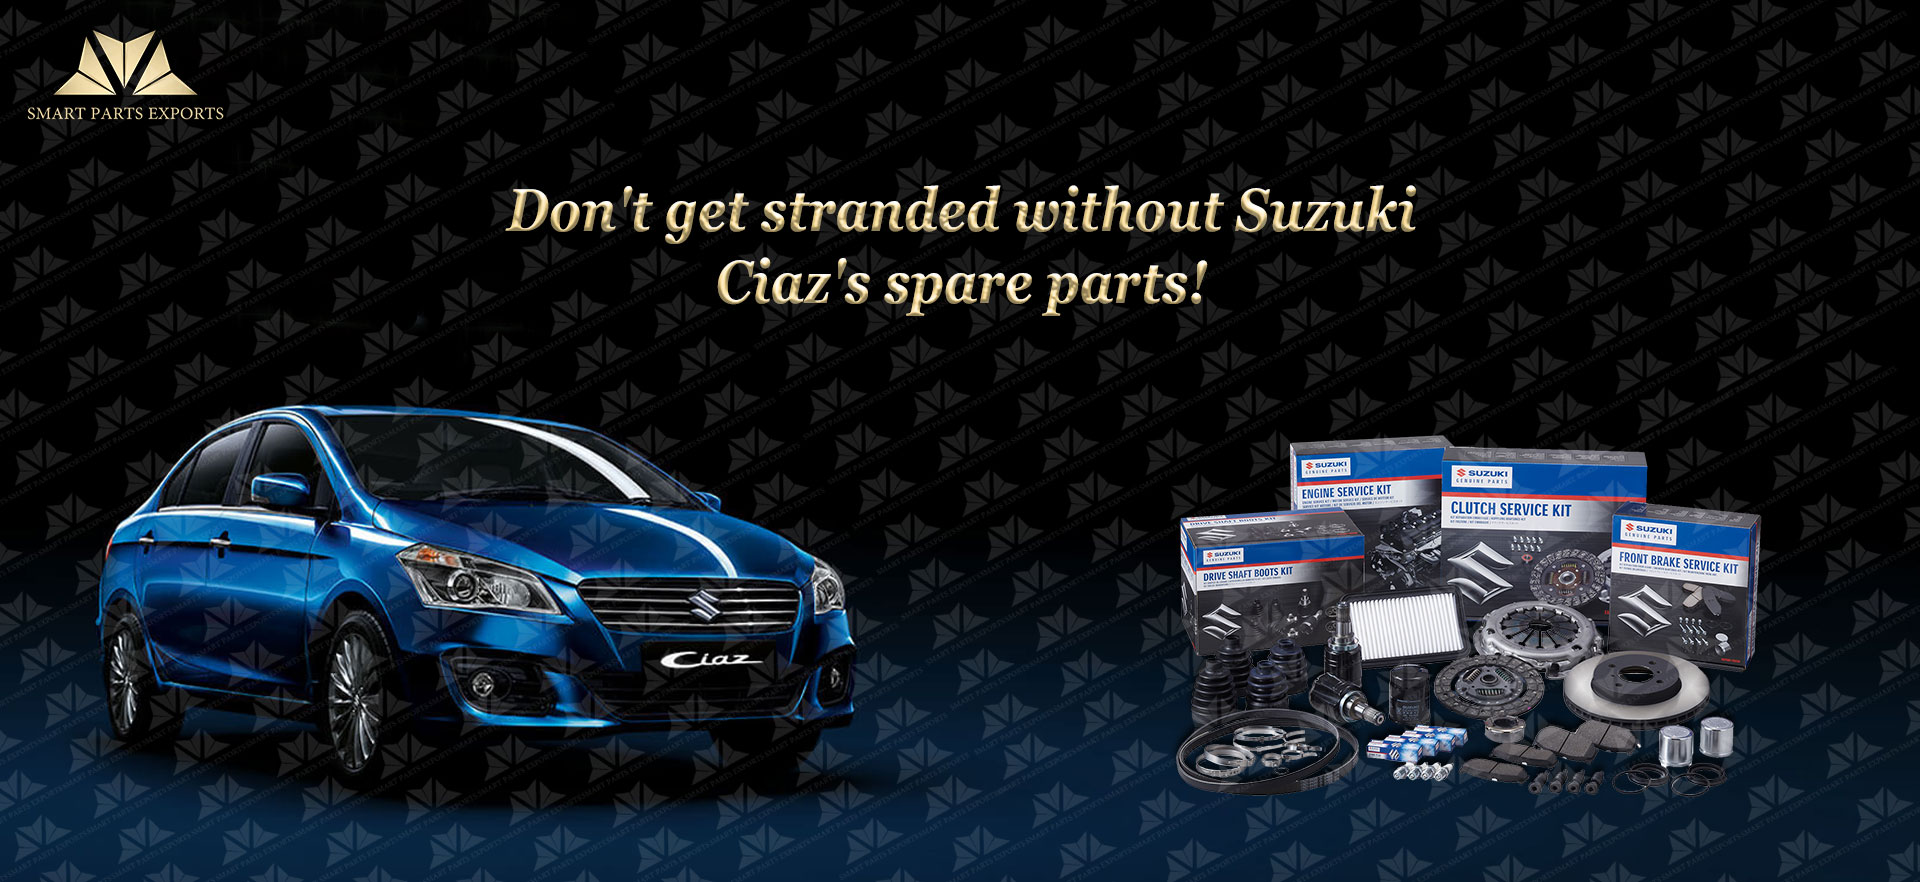 Don't get stranded without Suzuki Ciaz's spare parts!